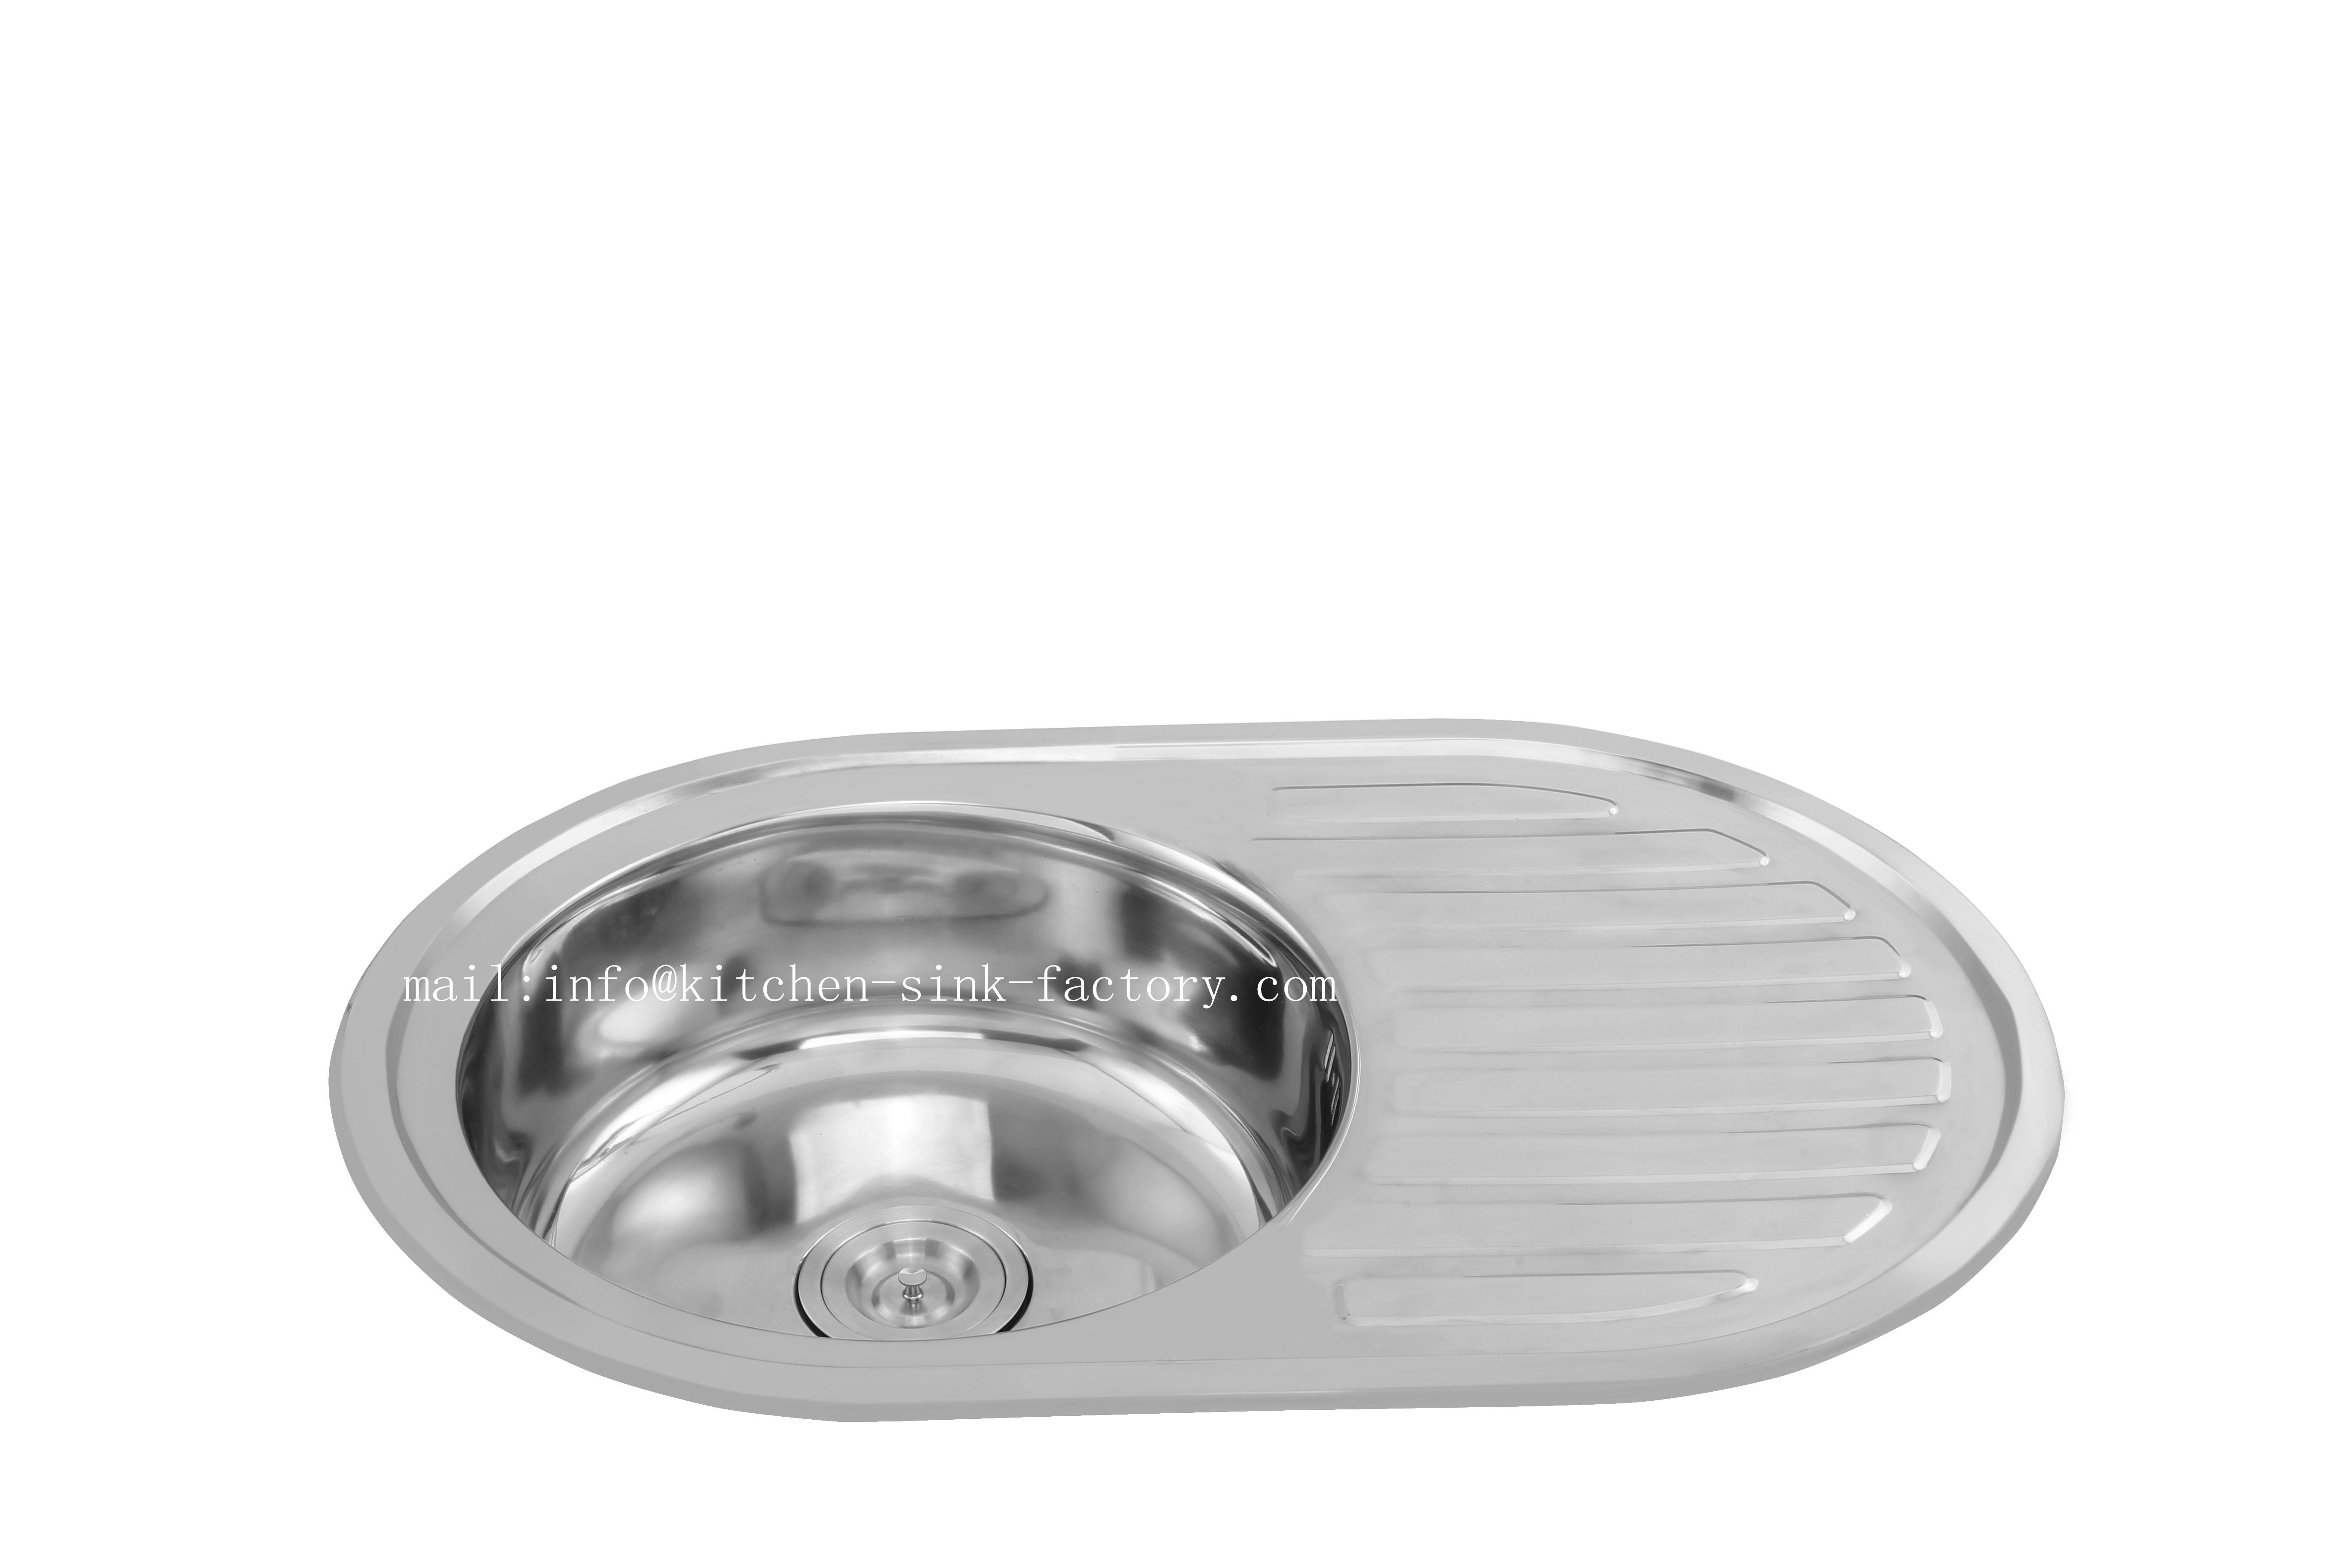 China Factory Suppy Stainless Steel Kitchen Sink WY-490